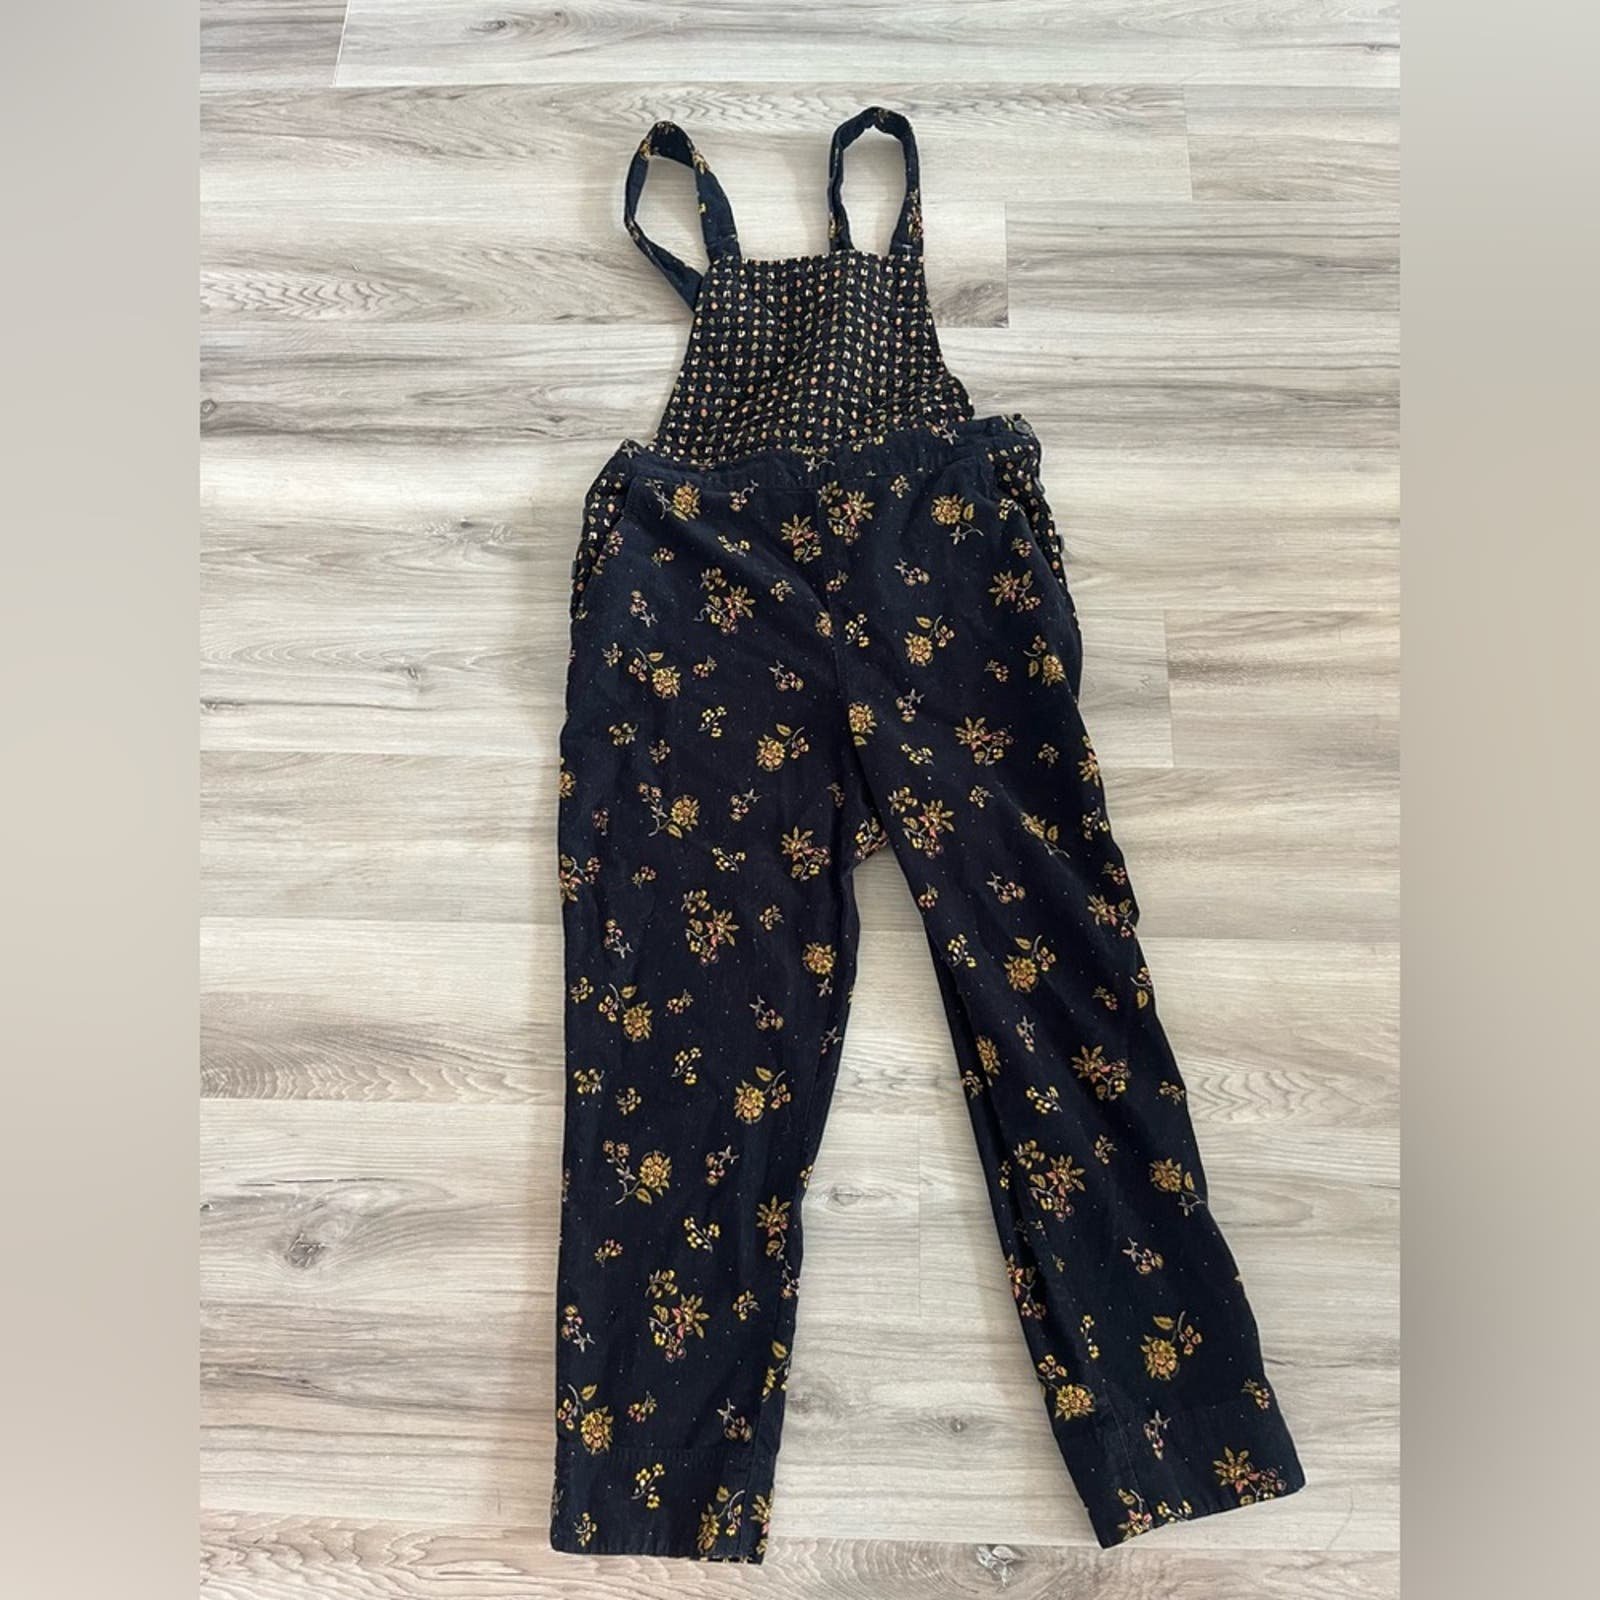 Discounted Madewell M P Corduroy Floral Overalls NX6tY6FTq for sale